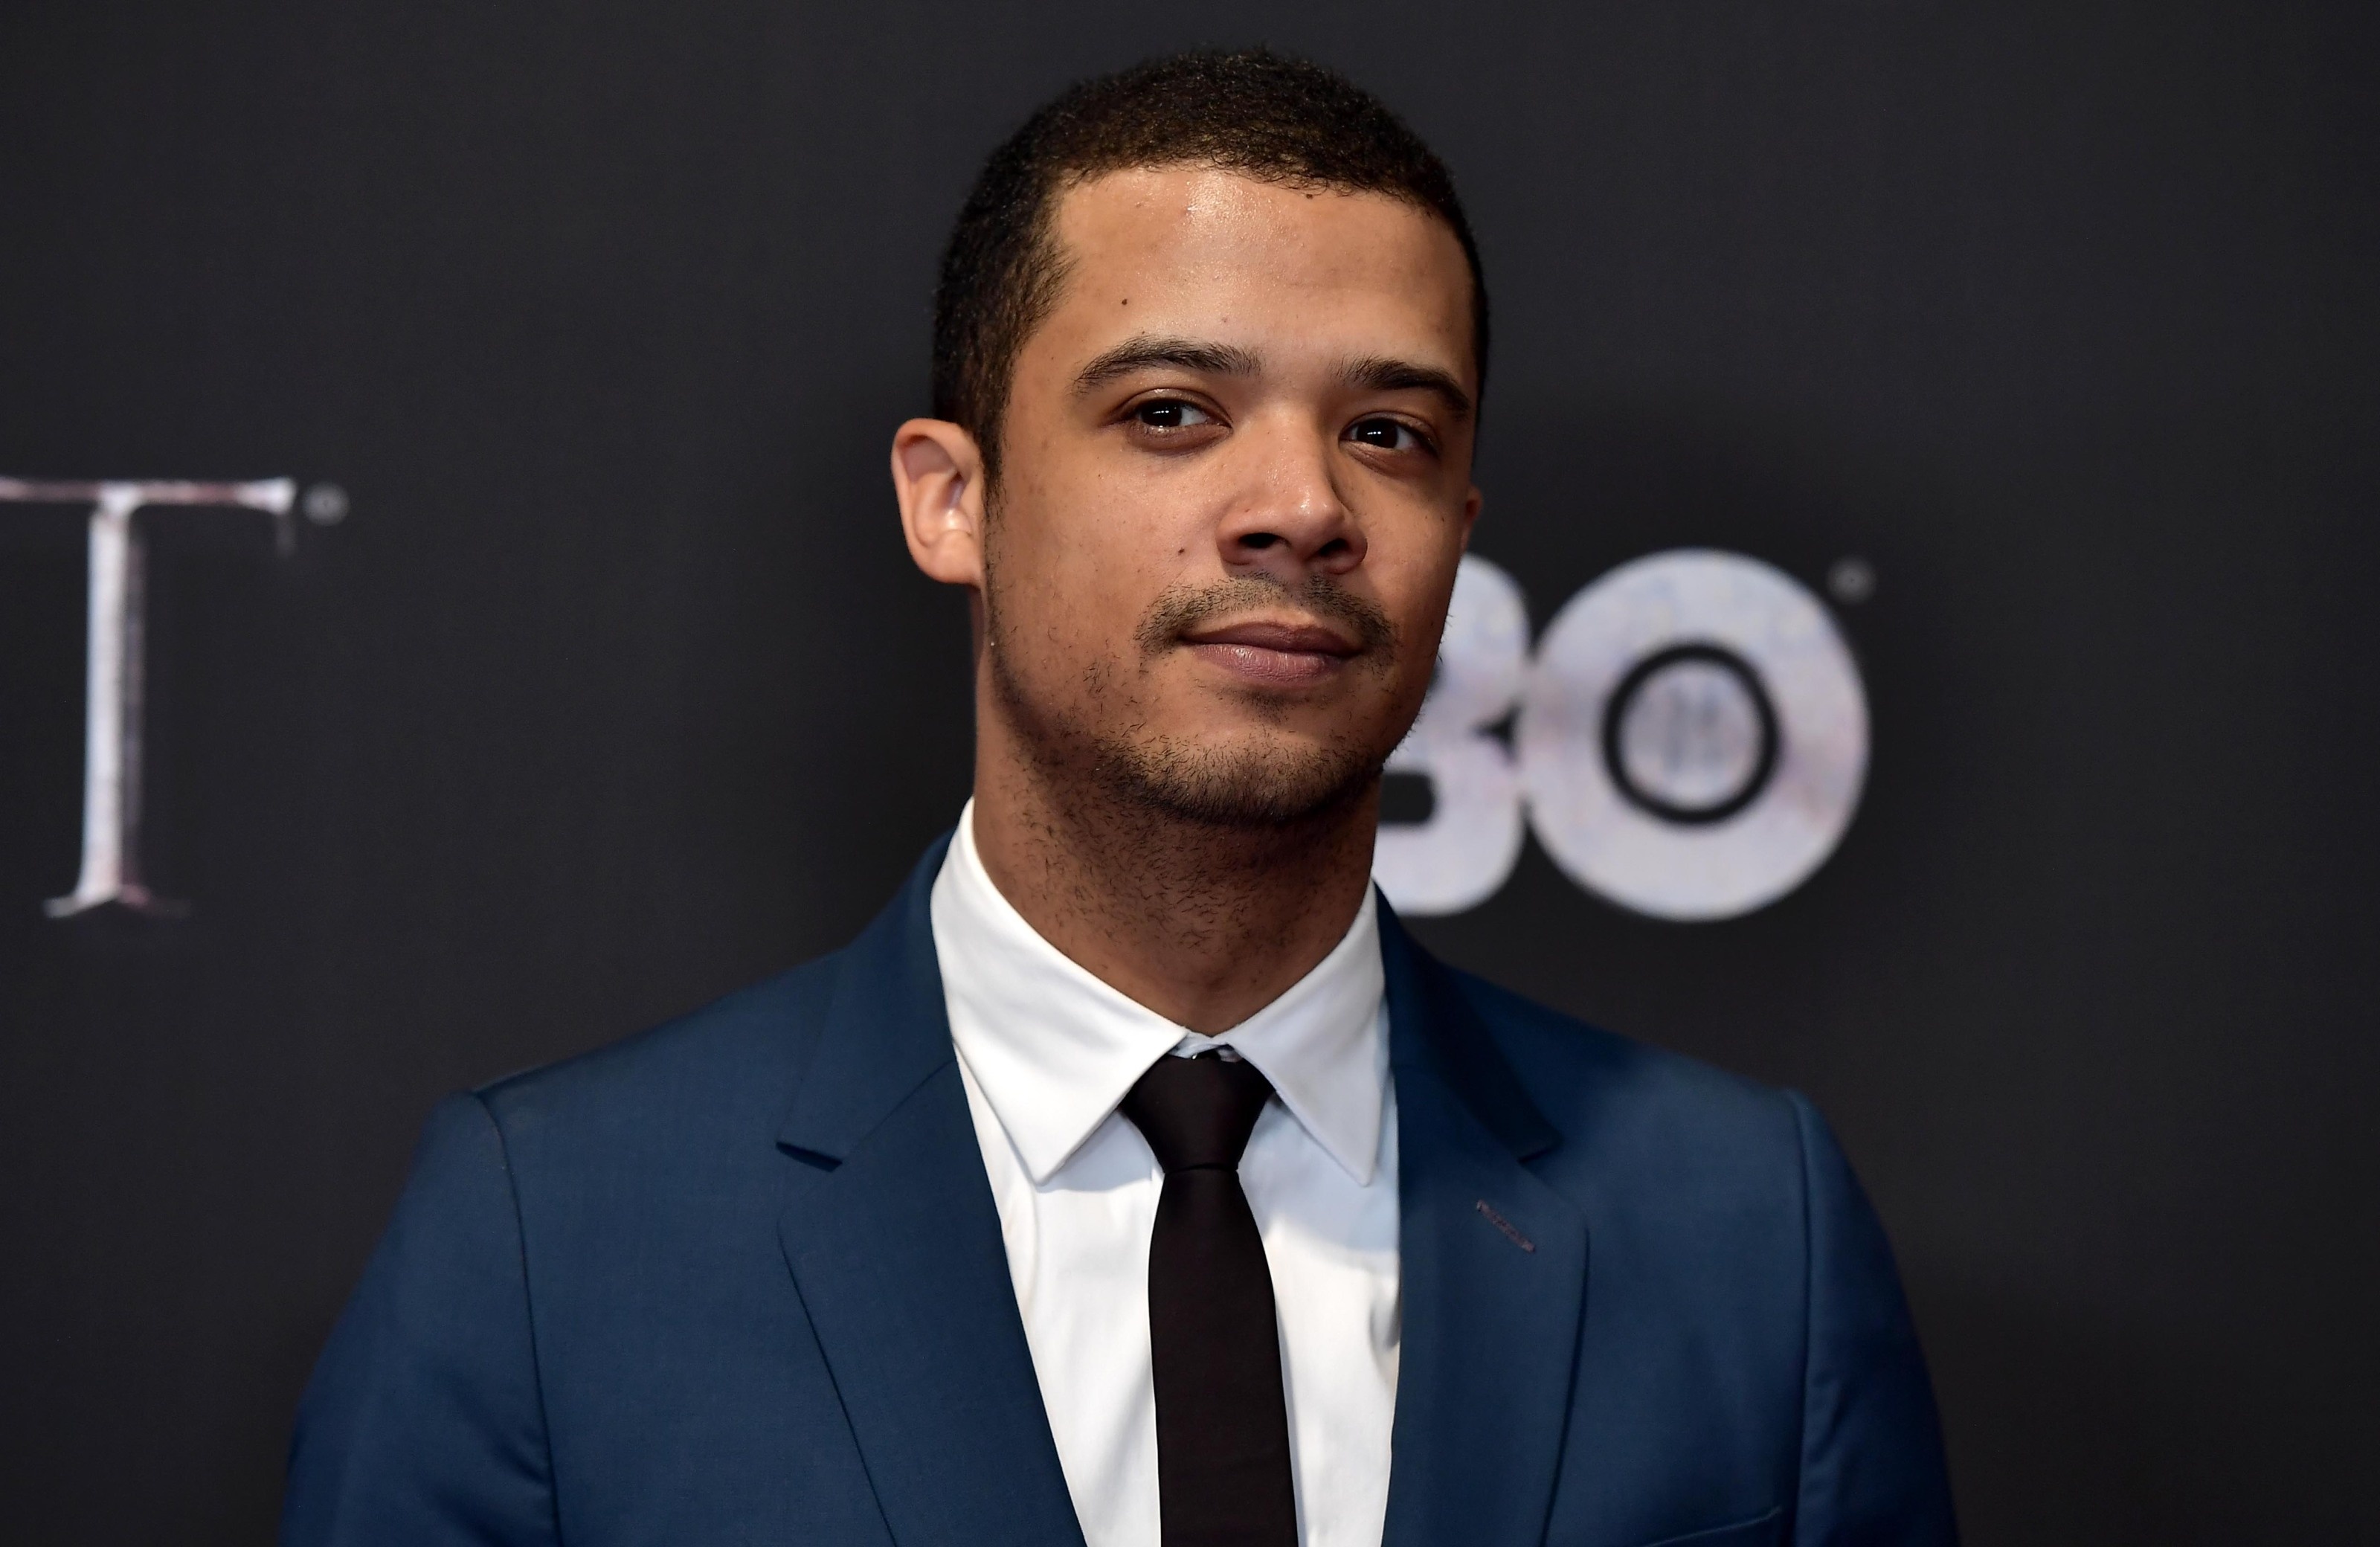 Jacob Anderson, Cast as Louis, Interview with the vampire, TV series, 3200x2080 HD Desktop